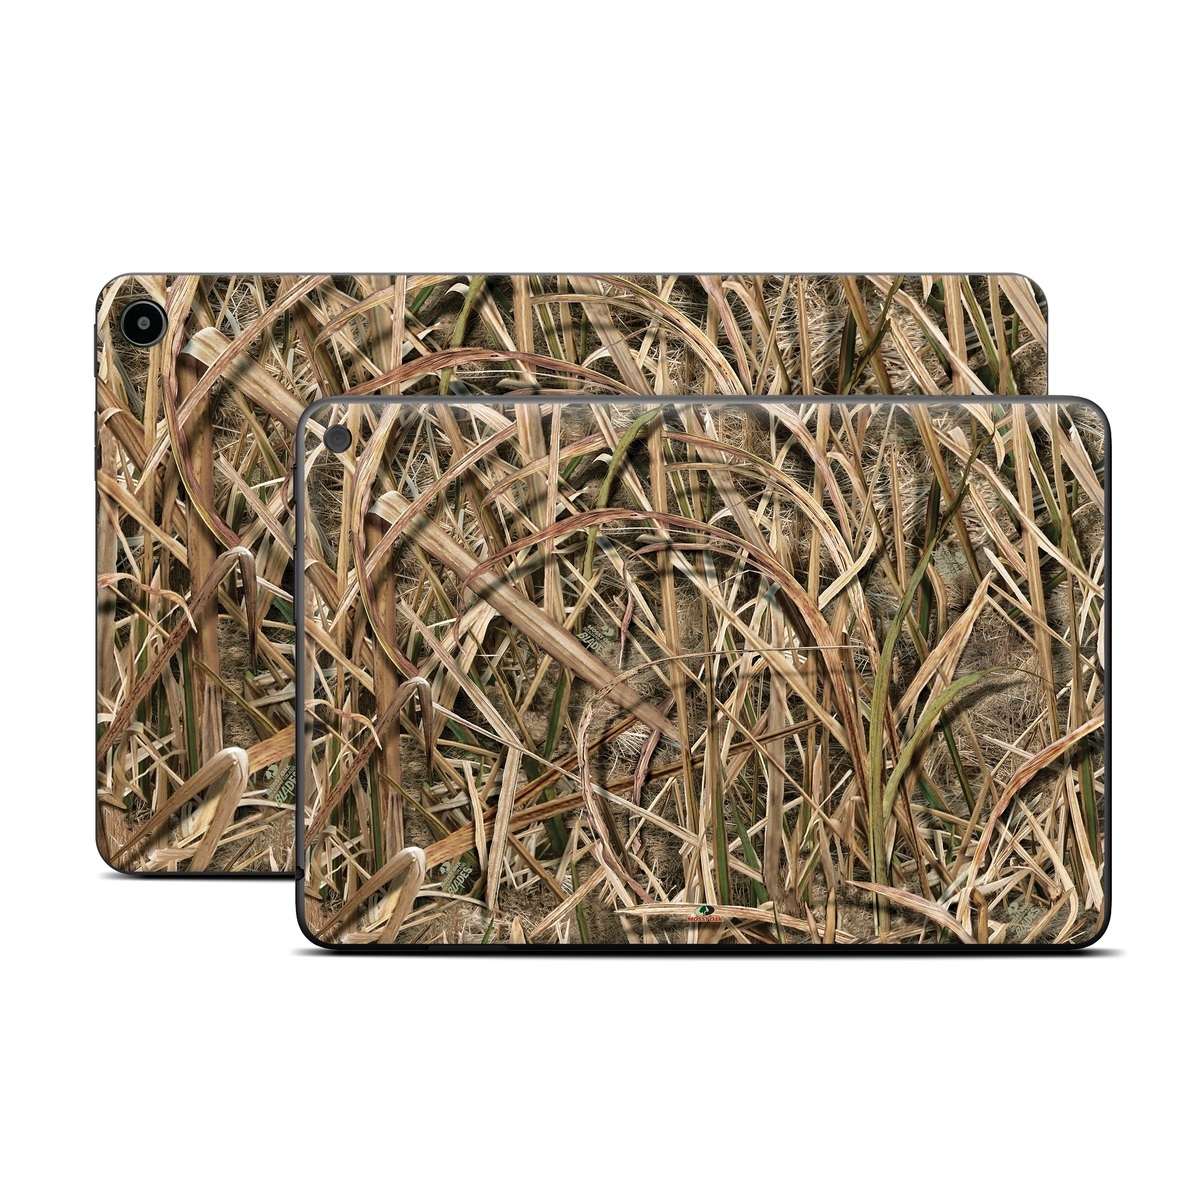 Amazon Fire Tablet Series Skin Skin design of Grass, Straw, Plant, Grass family, Twig, Adaptation, Agriculture, with black, green, gray, red colors